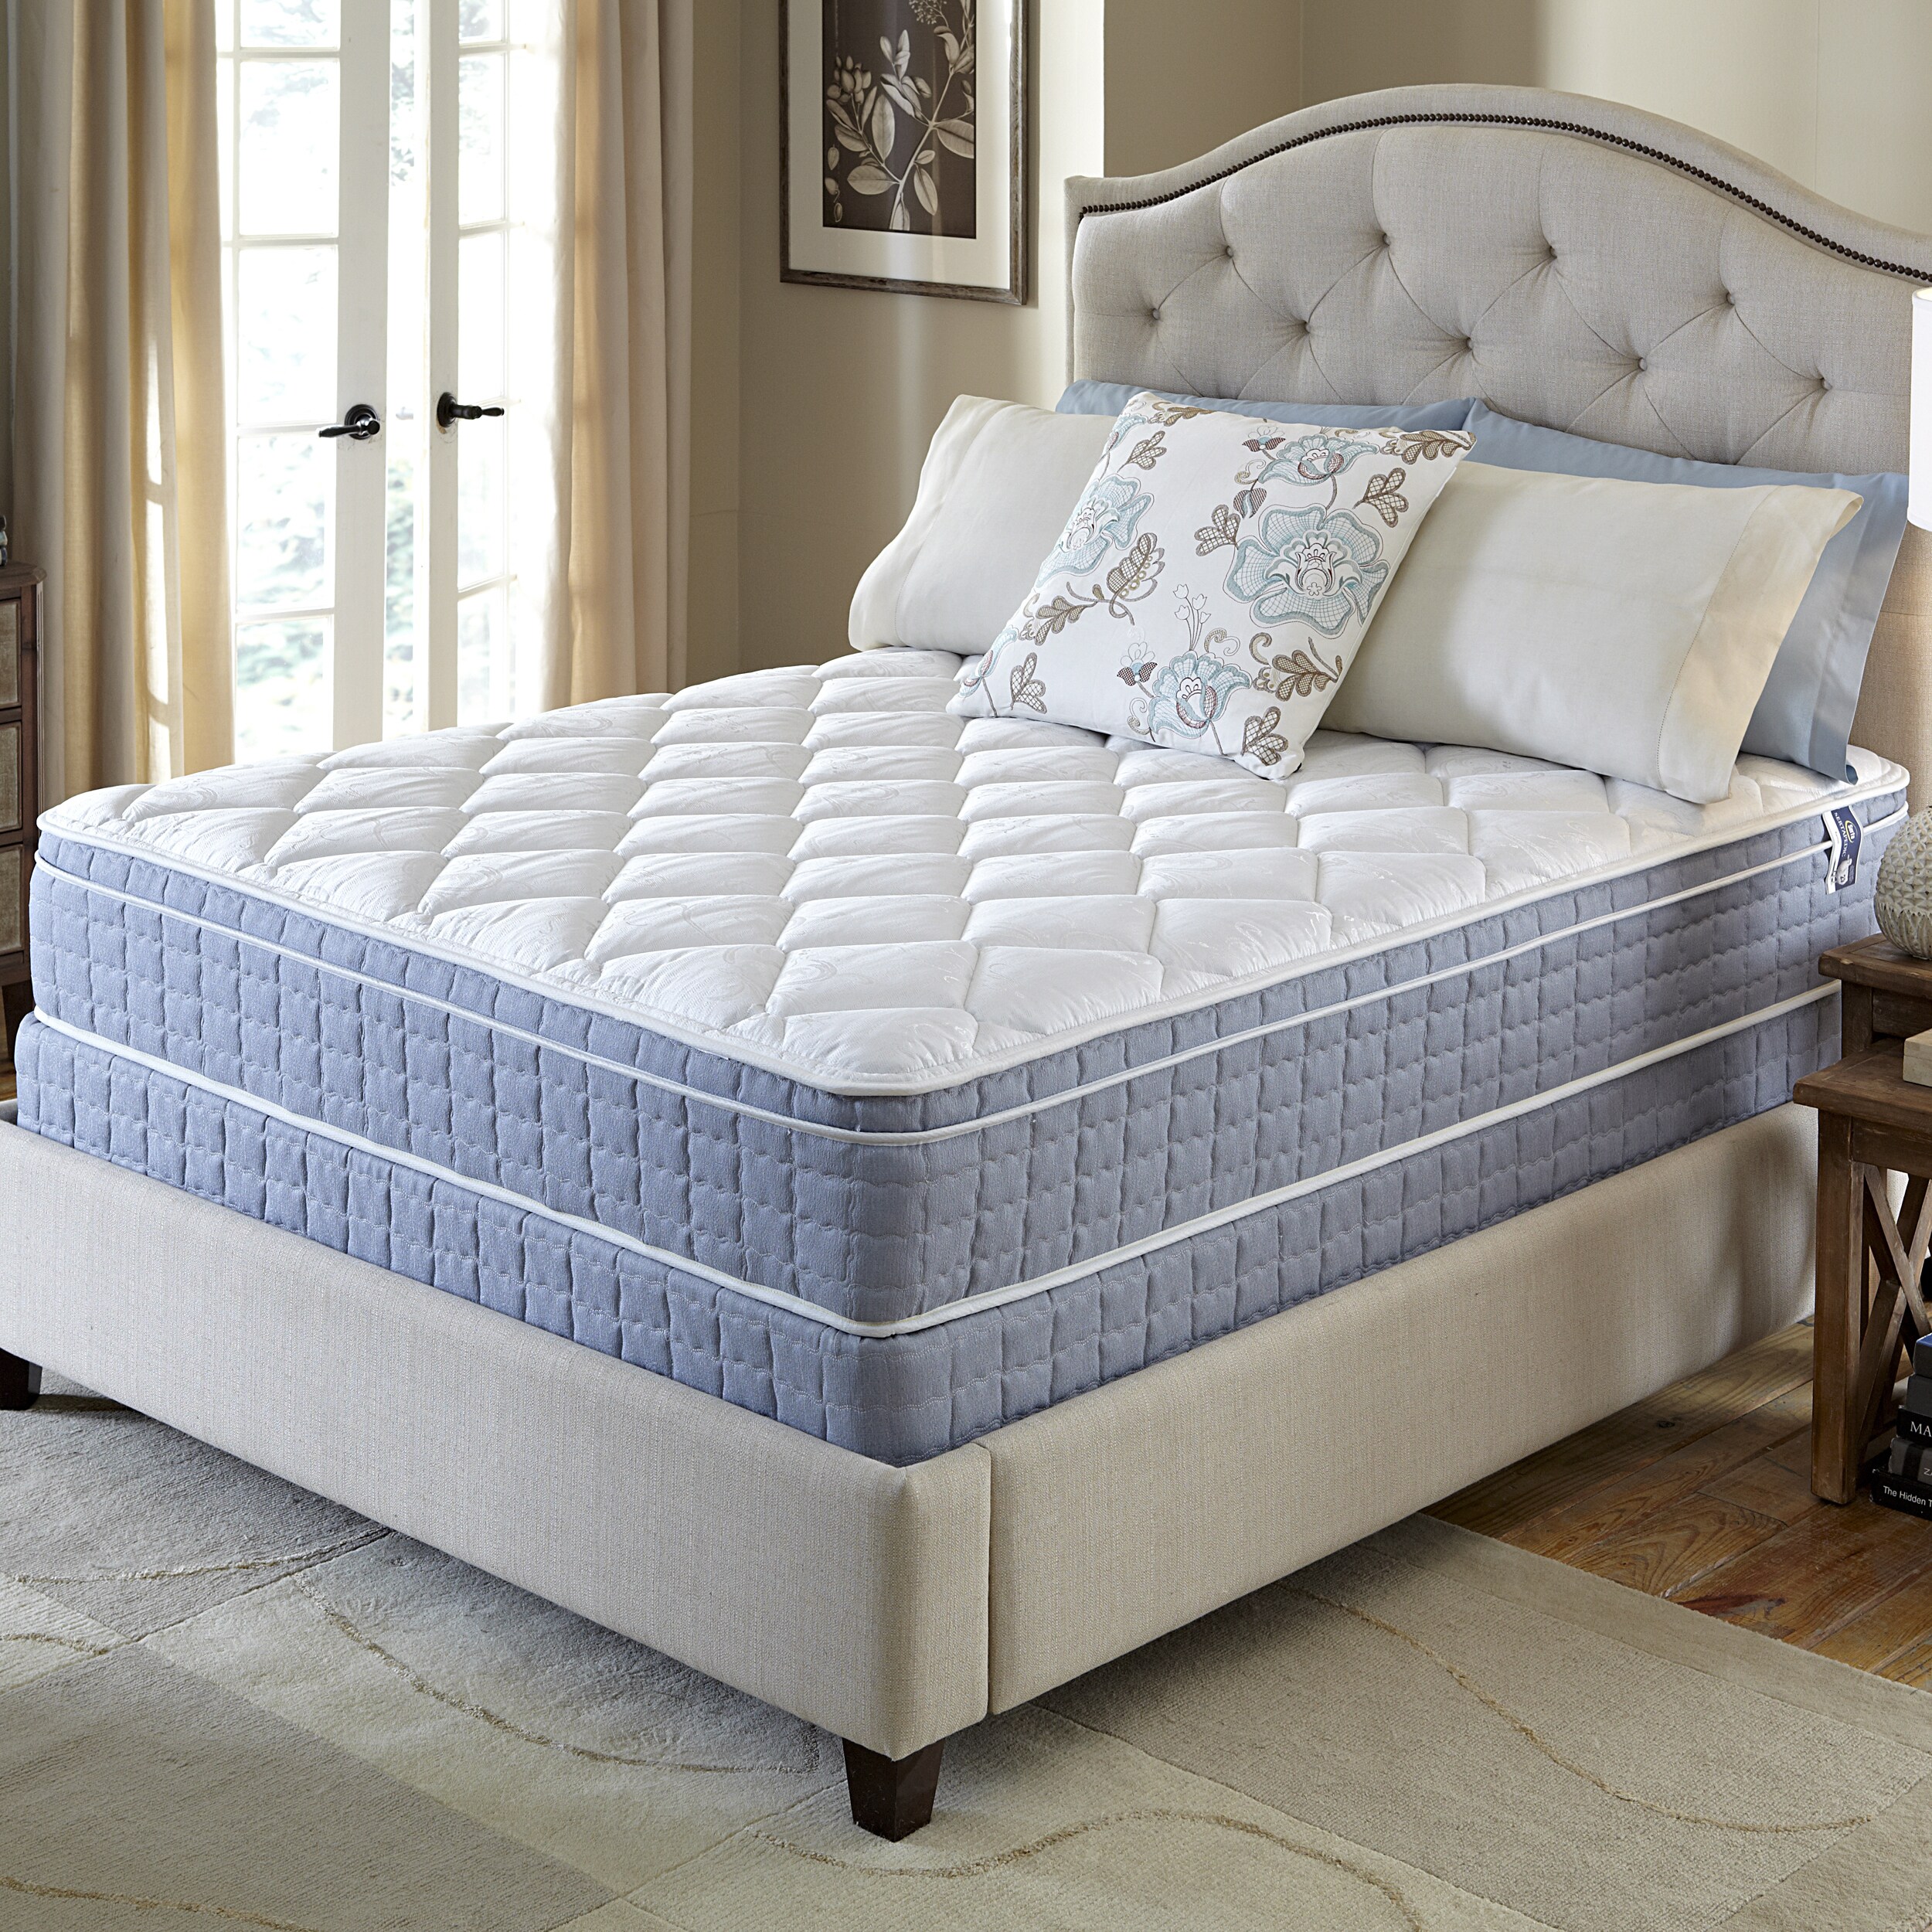 Serta Revival Euro Top Split Queensize Mattress and Foundation Set Overstock Shopping Great